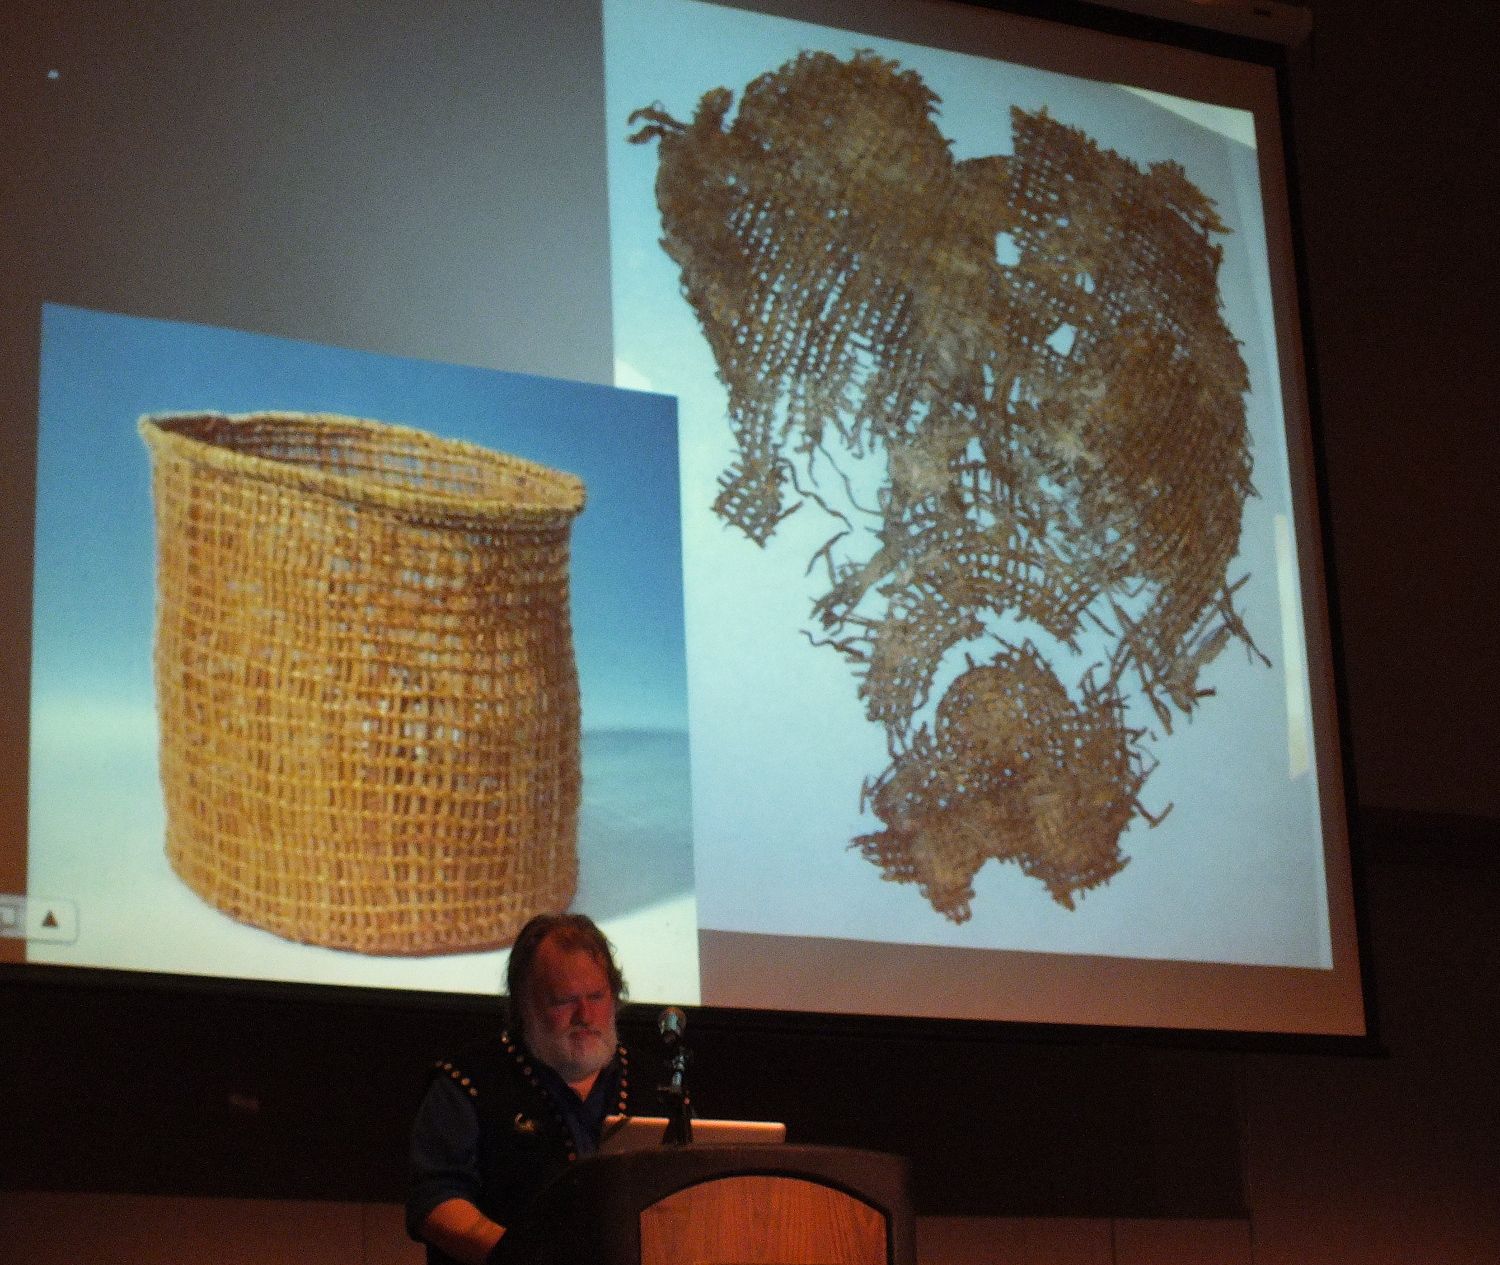 State curator of collections Steve Henrikson highlights a 6,000 year old recovered basket fragment (right) and a replica (left) made by noted basket weaver Delores Churchill. (Photo by Matt Miller/KTOO)